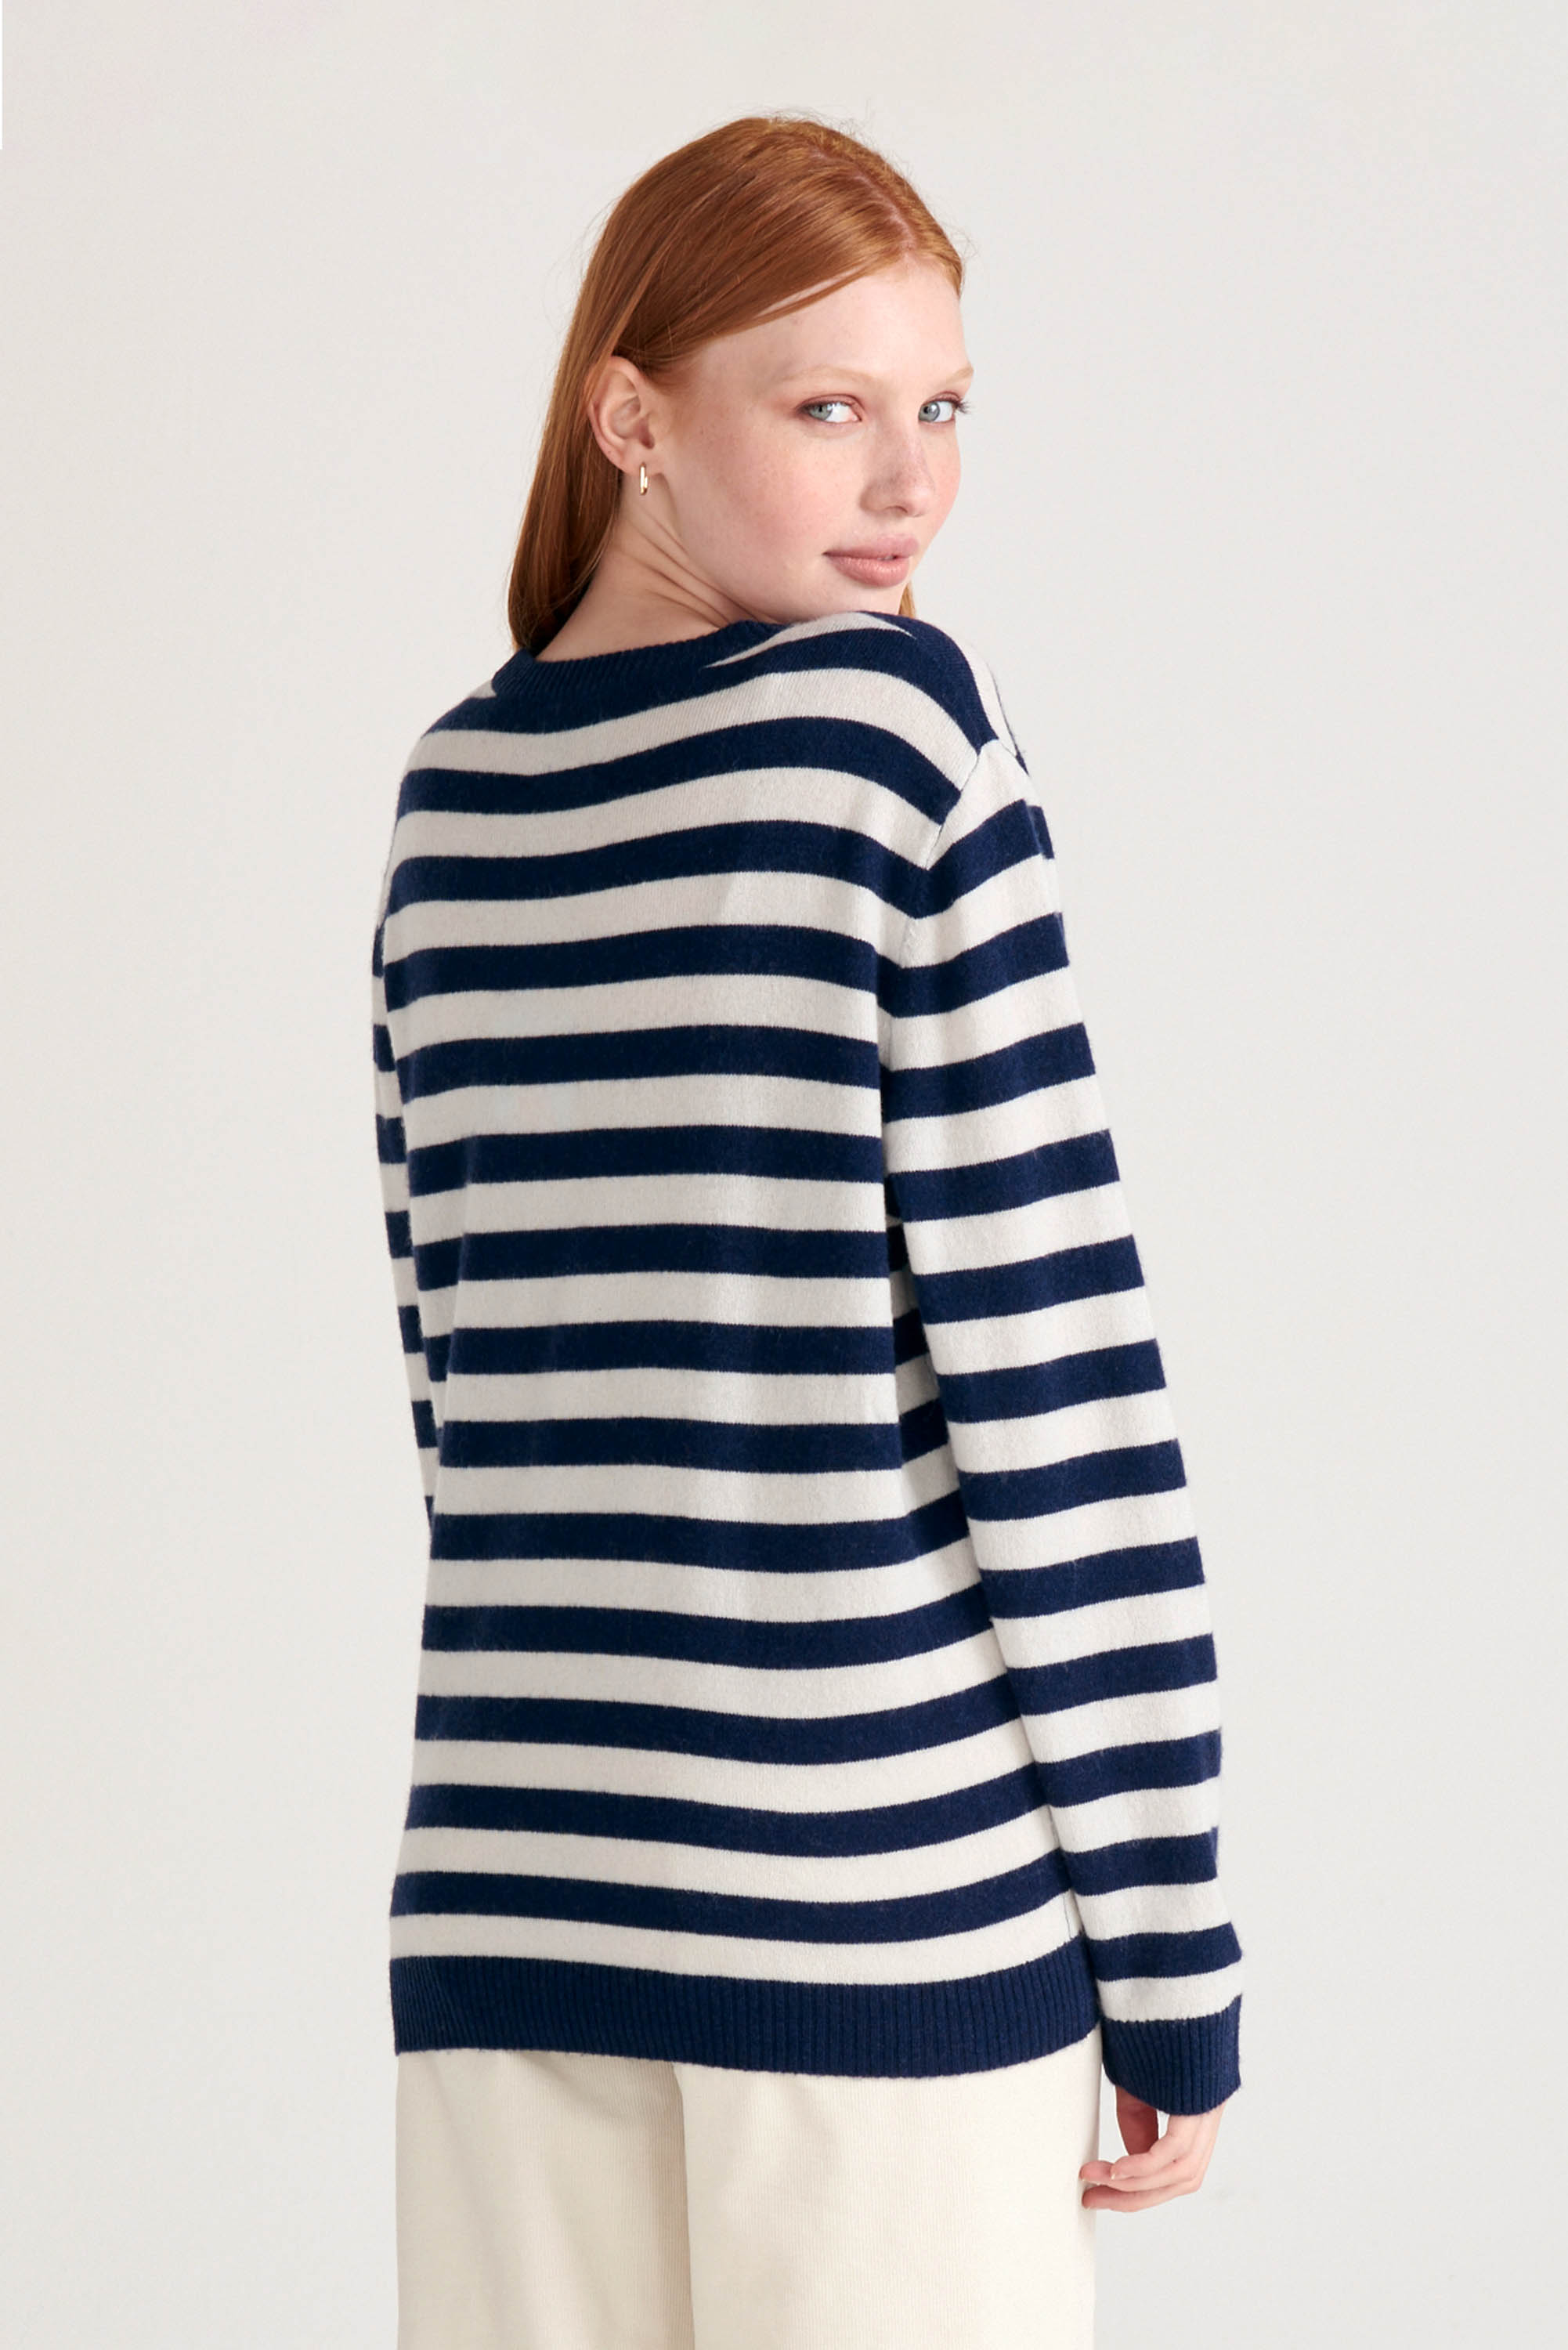 Red haired female model wearing Jumper1234 Navy and cream stripe cashmere and wool mix crew neck jumper with pink and red love heart intarsia facing away from the camera